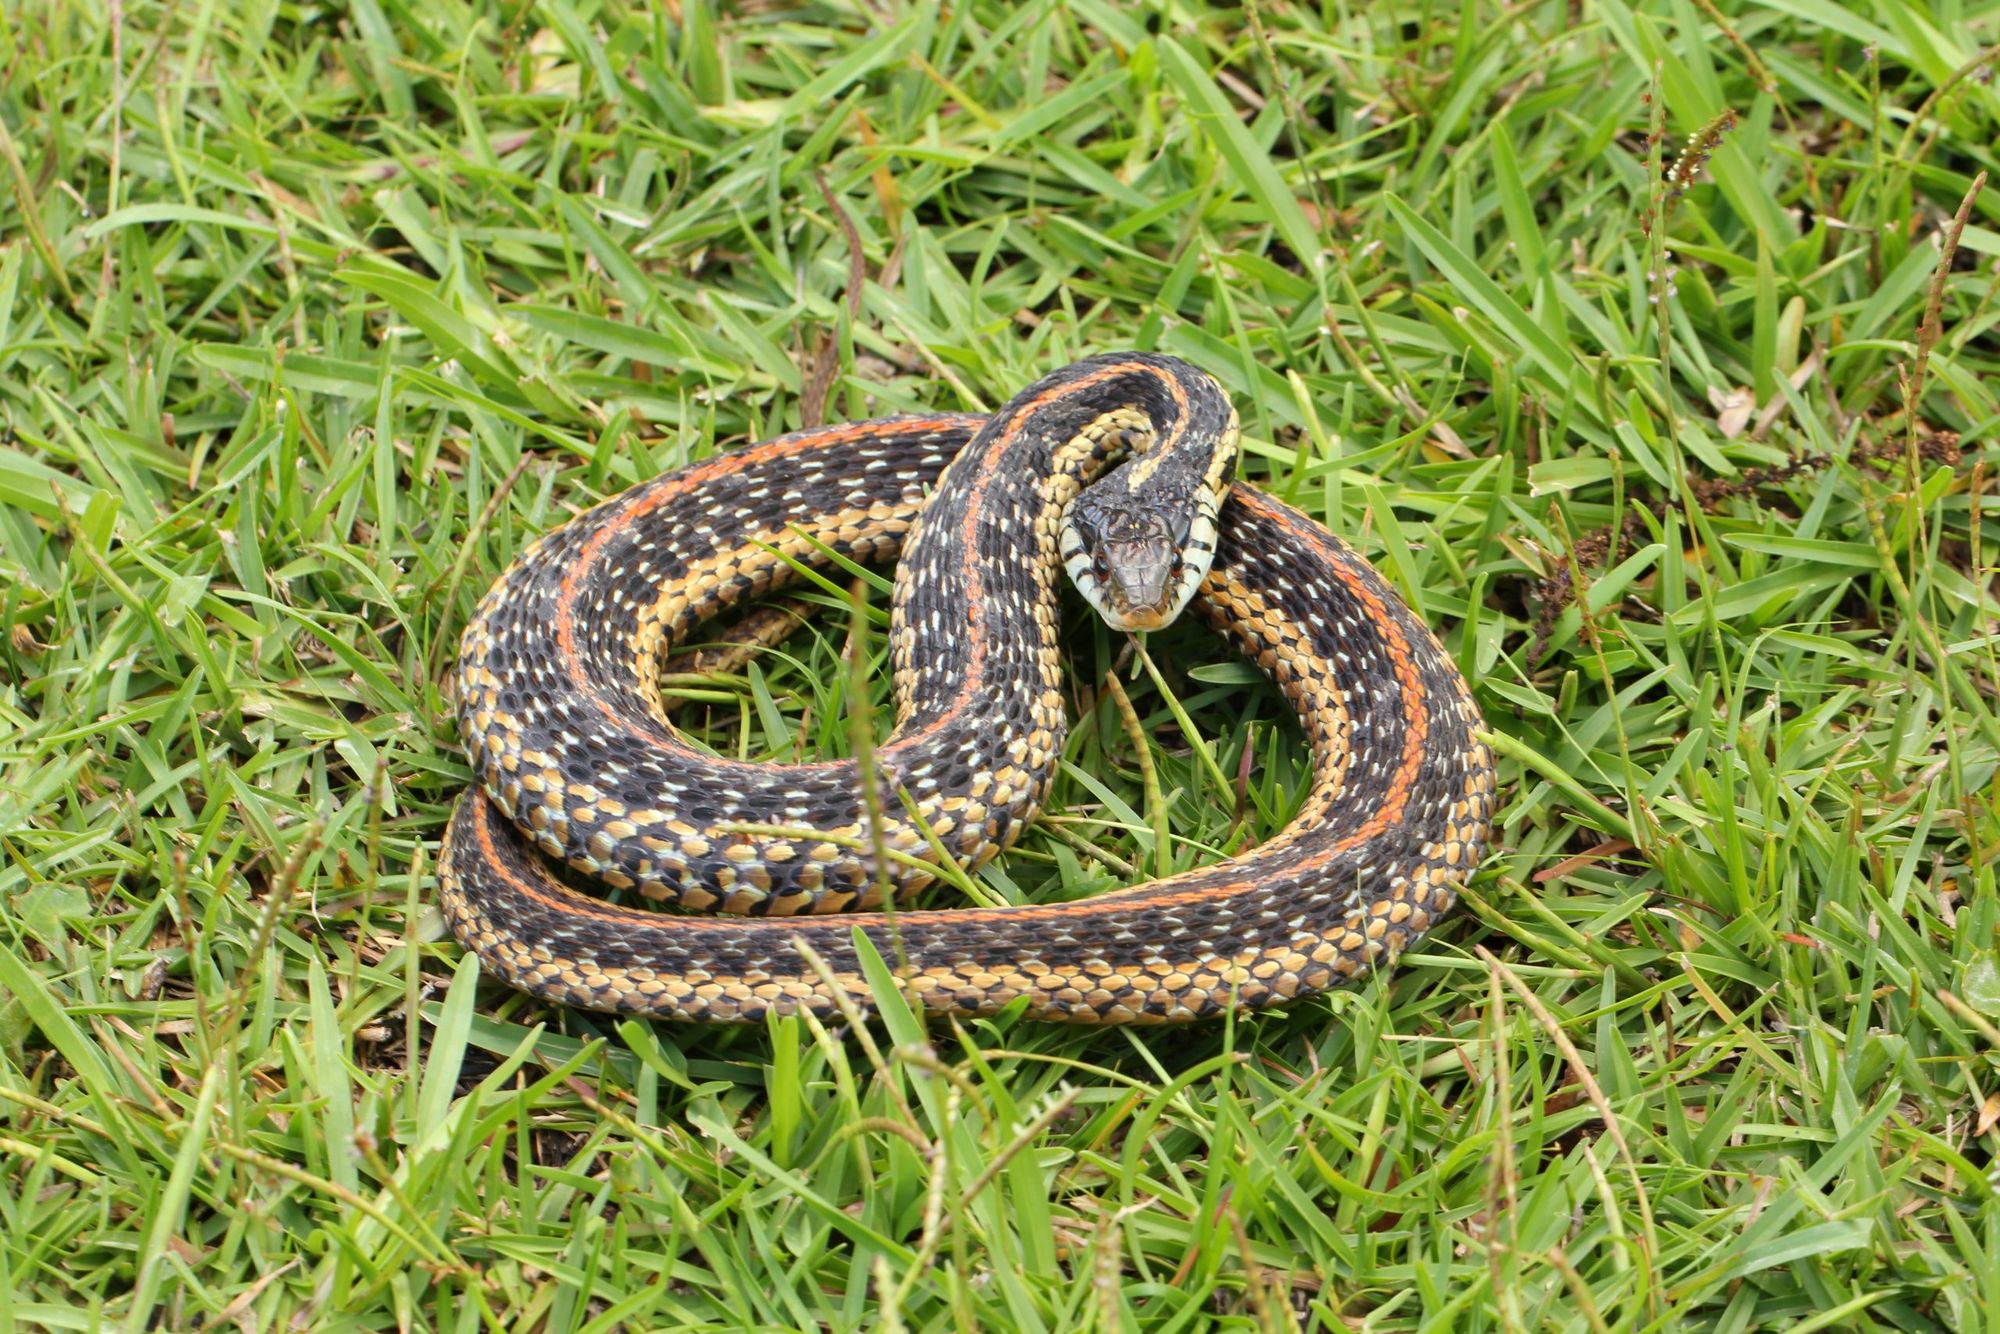 A black snake with yellow stripes lies coiled in grass.